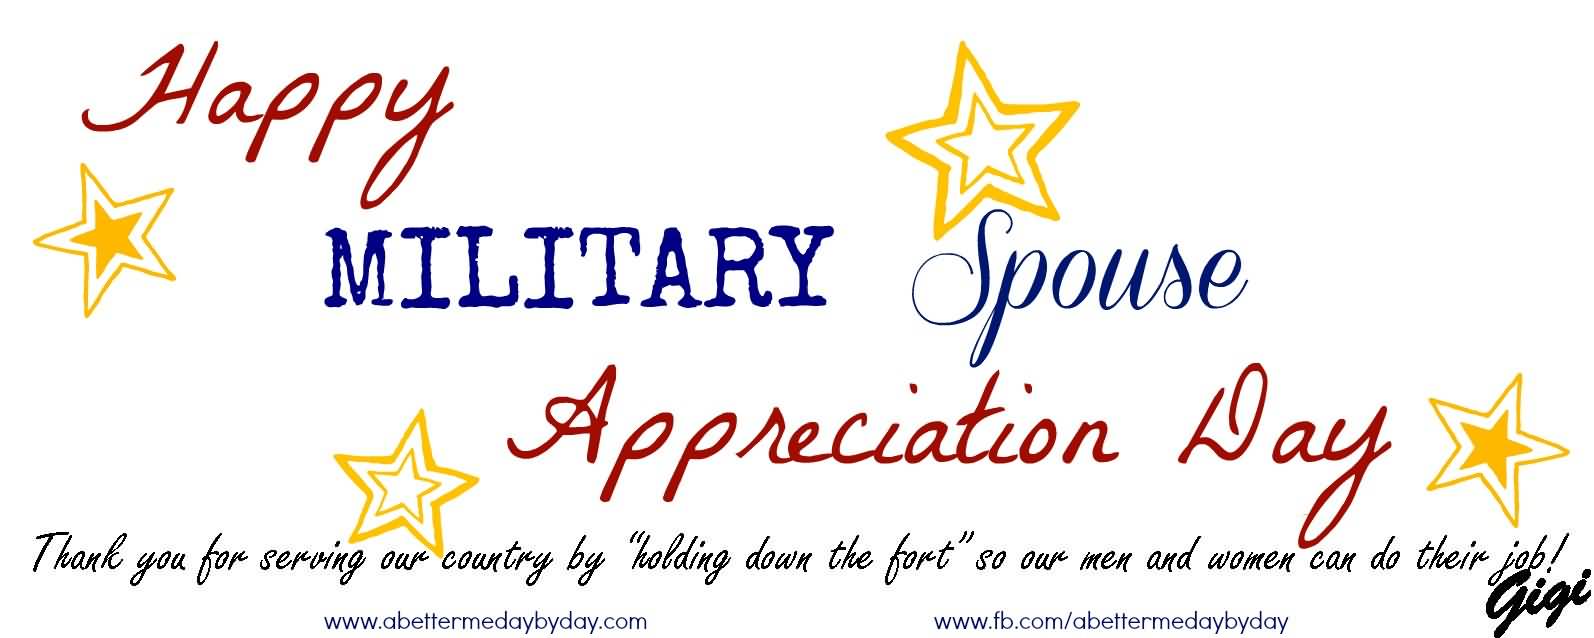 Happy Military Spouse Appreciation Day Thank You For Serving Our Country By Holding Down The Fort So Our Men And Women Can Do Their Job